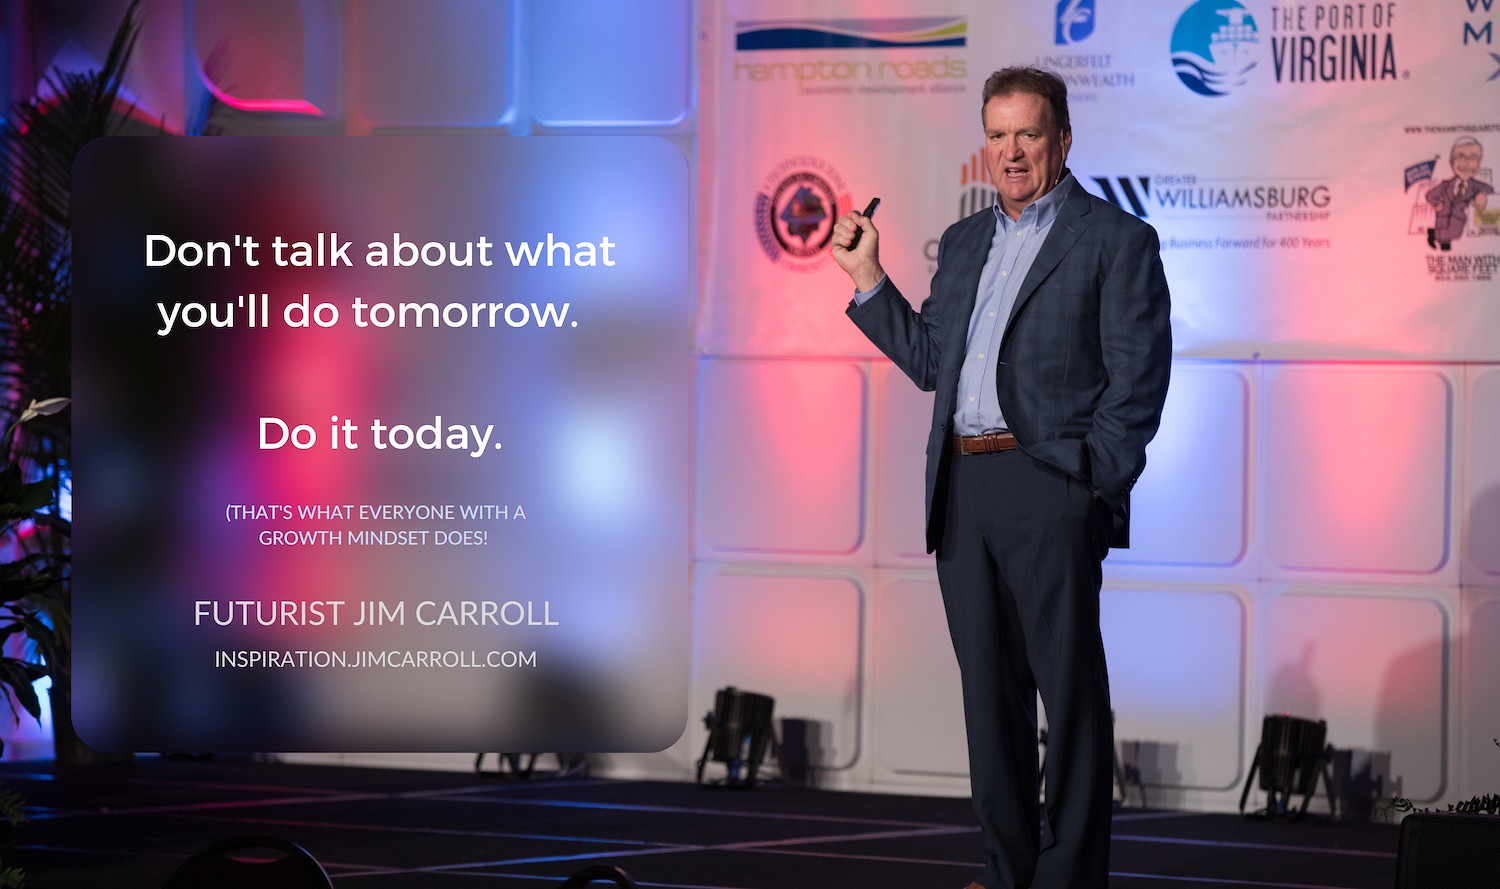 "Don't talk about what you'll do tomorrow. Do it today." - Futurist Jim Carroll